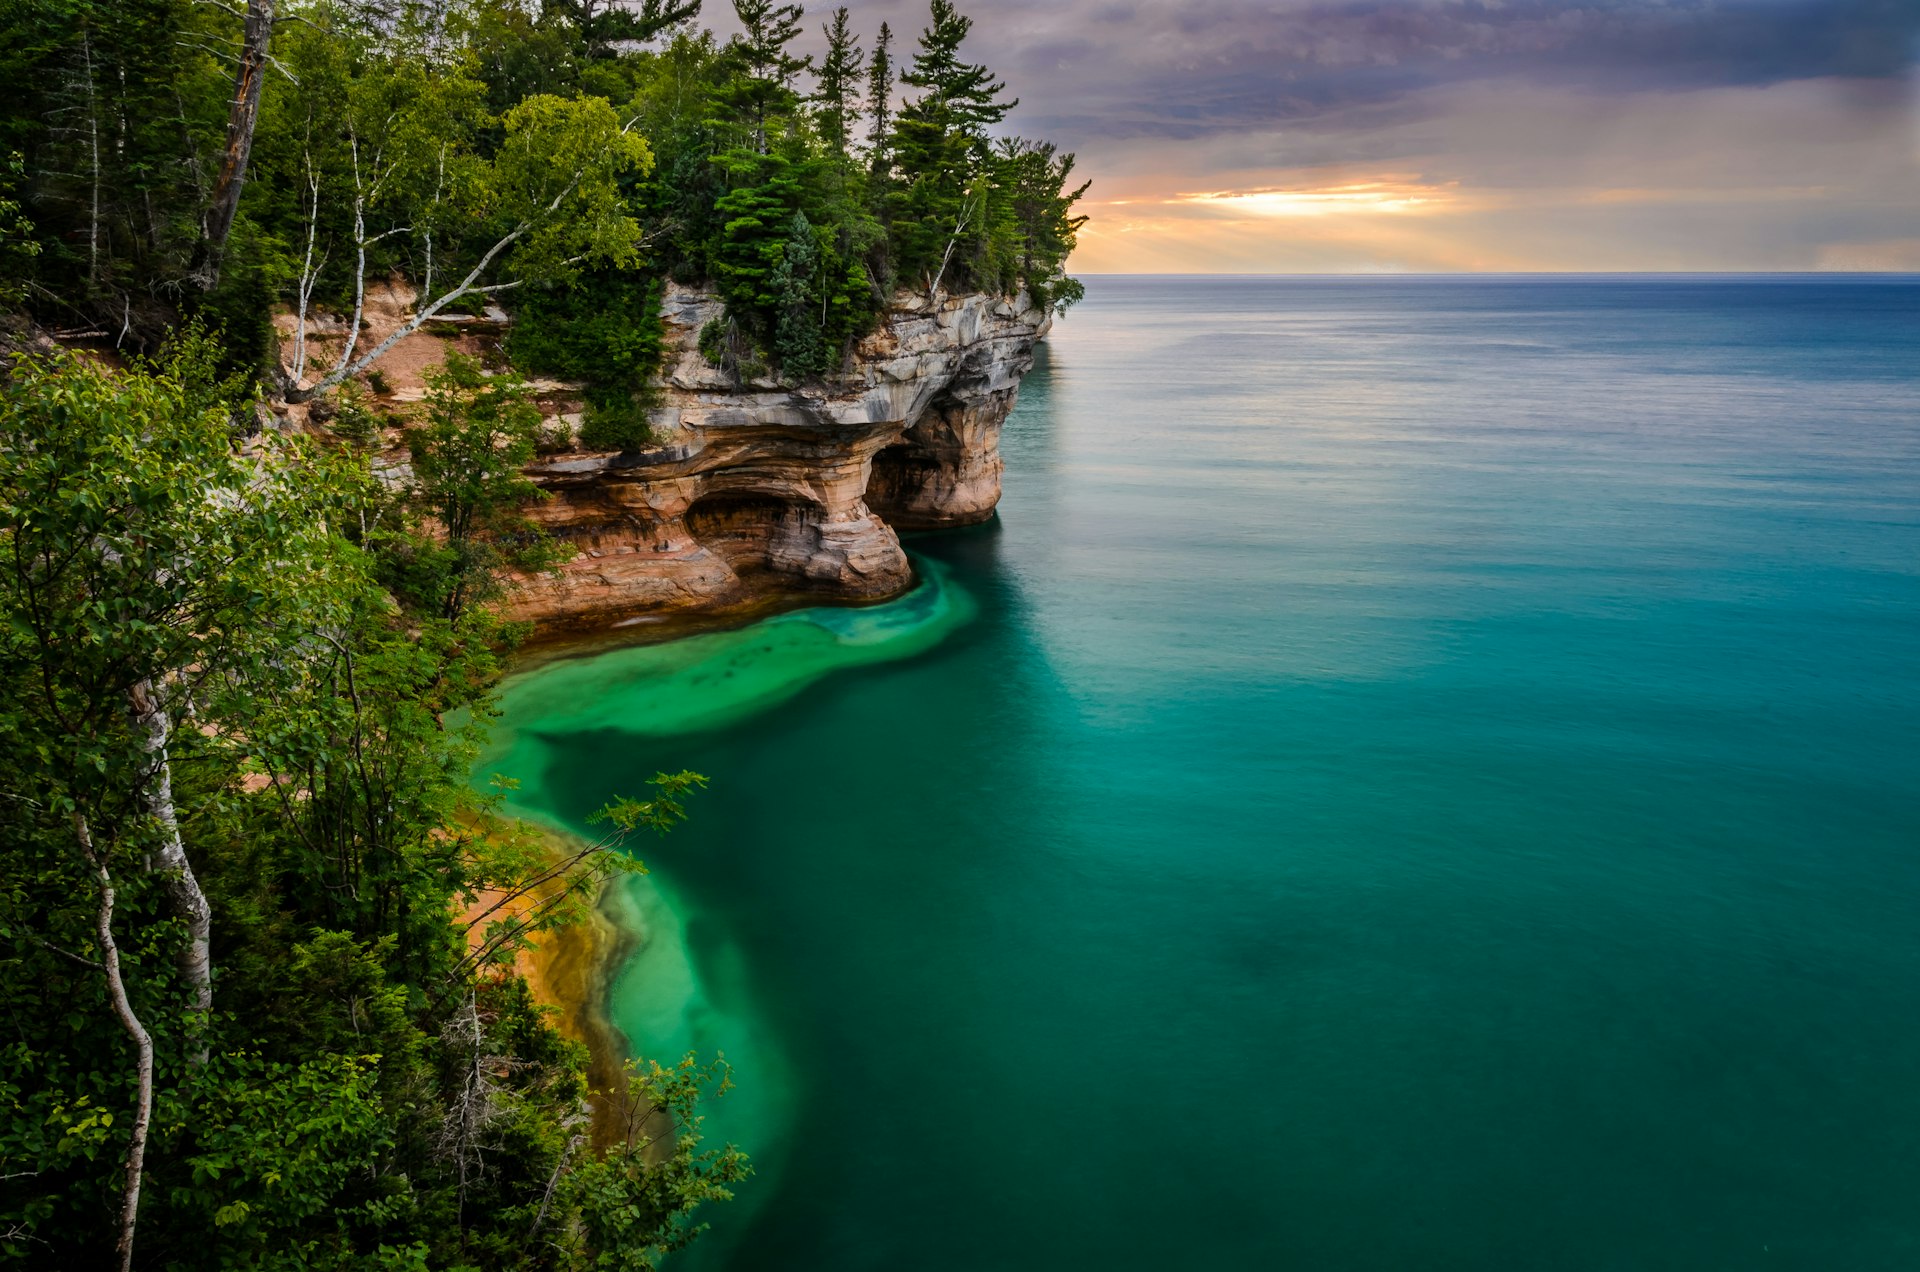 A rocky cliff covered with trees drops into the blue water at Pictured Rocks National Lakeshore in Michigan